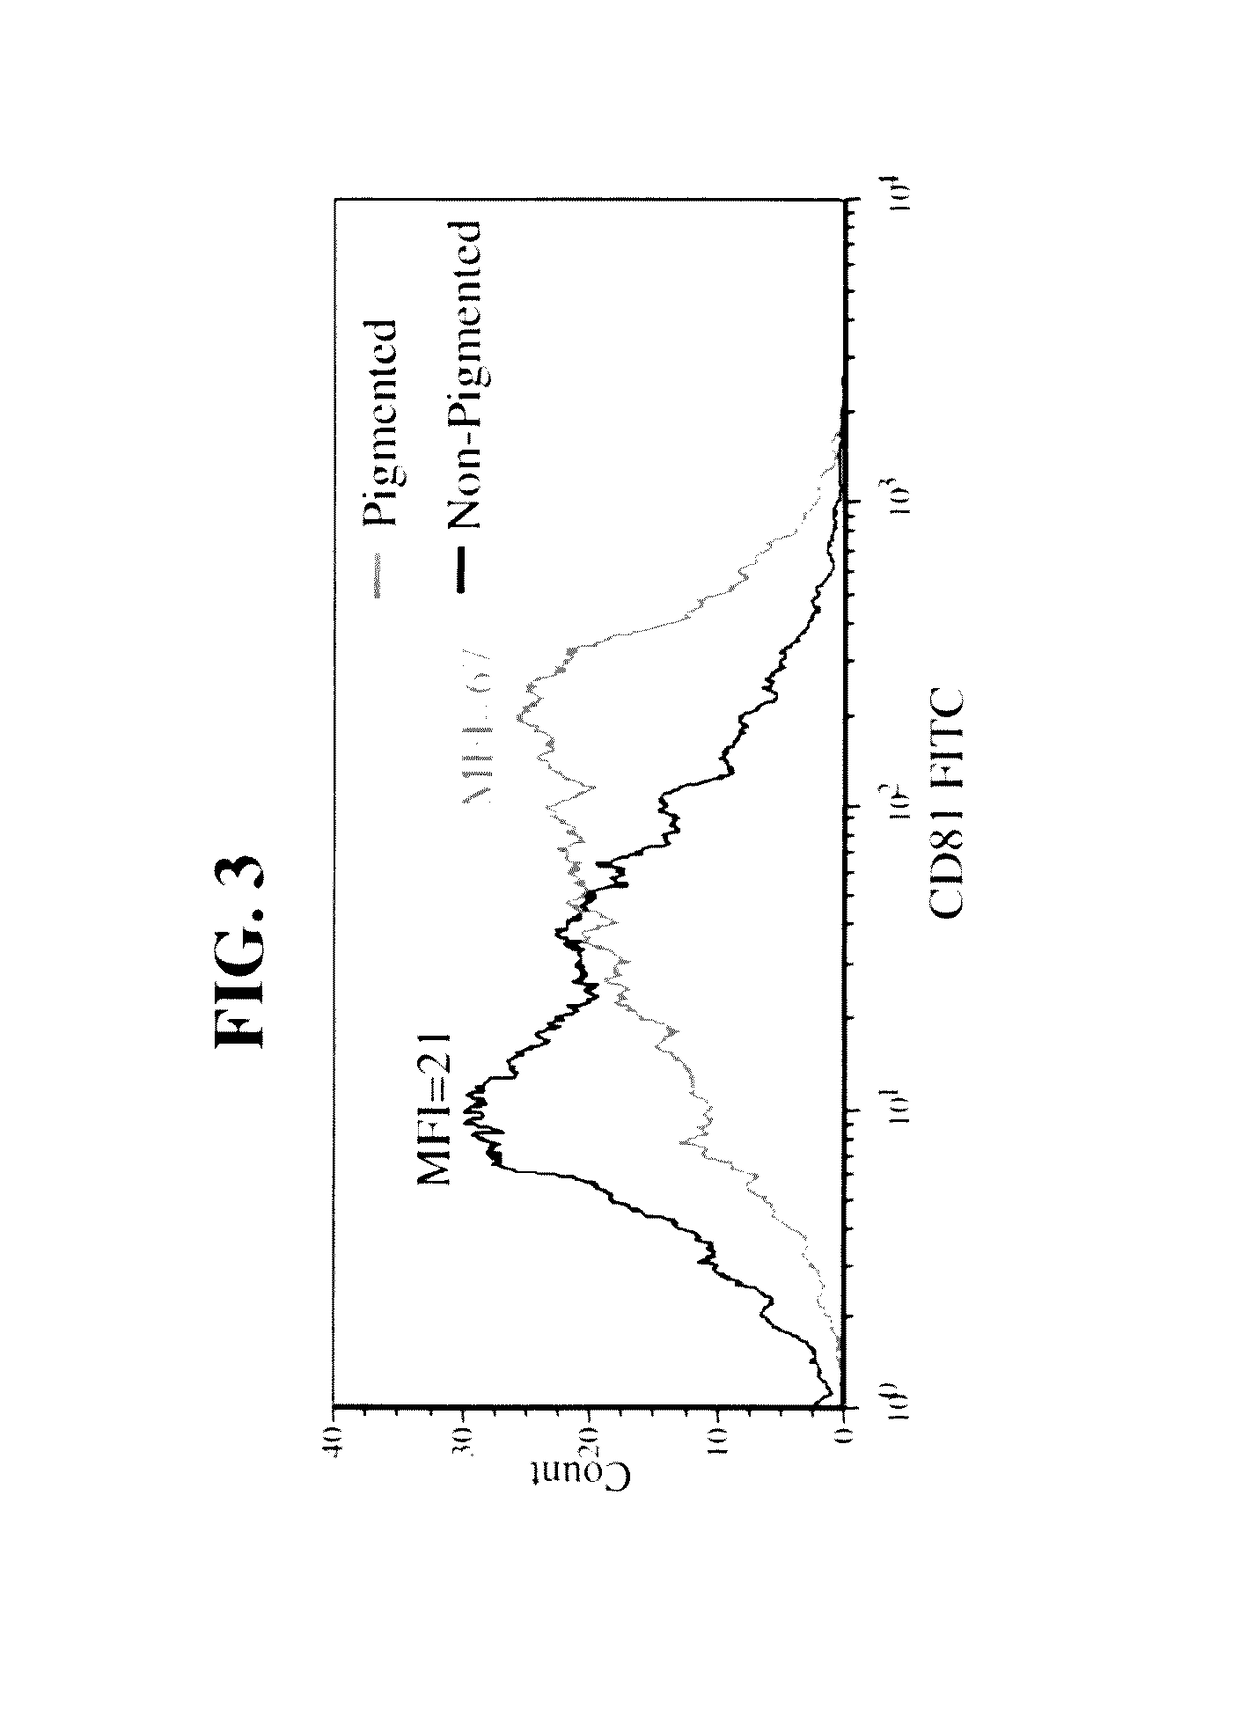 Methods of selecting retinal pigmented epithelial cells